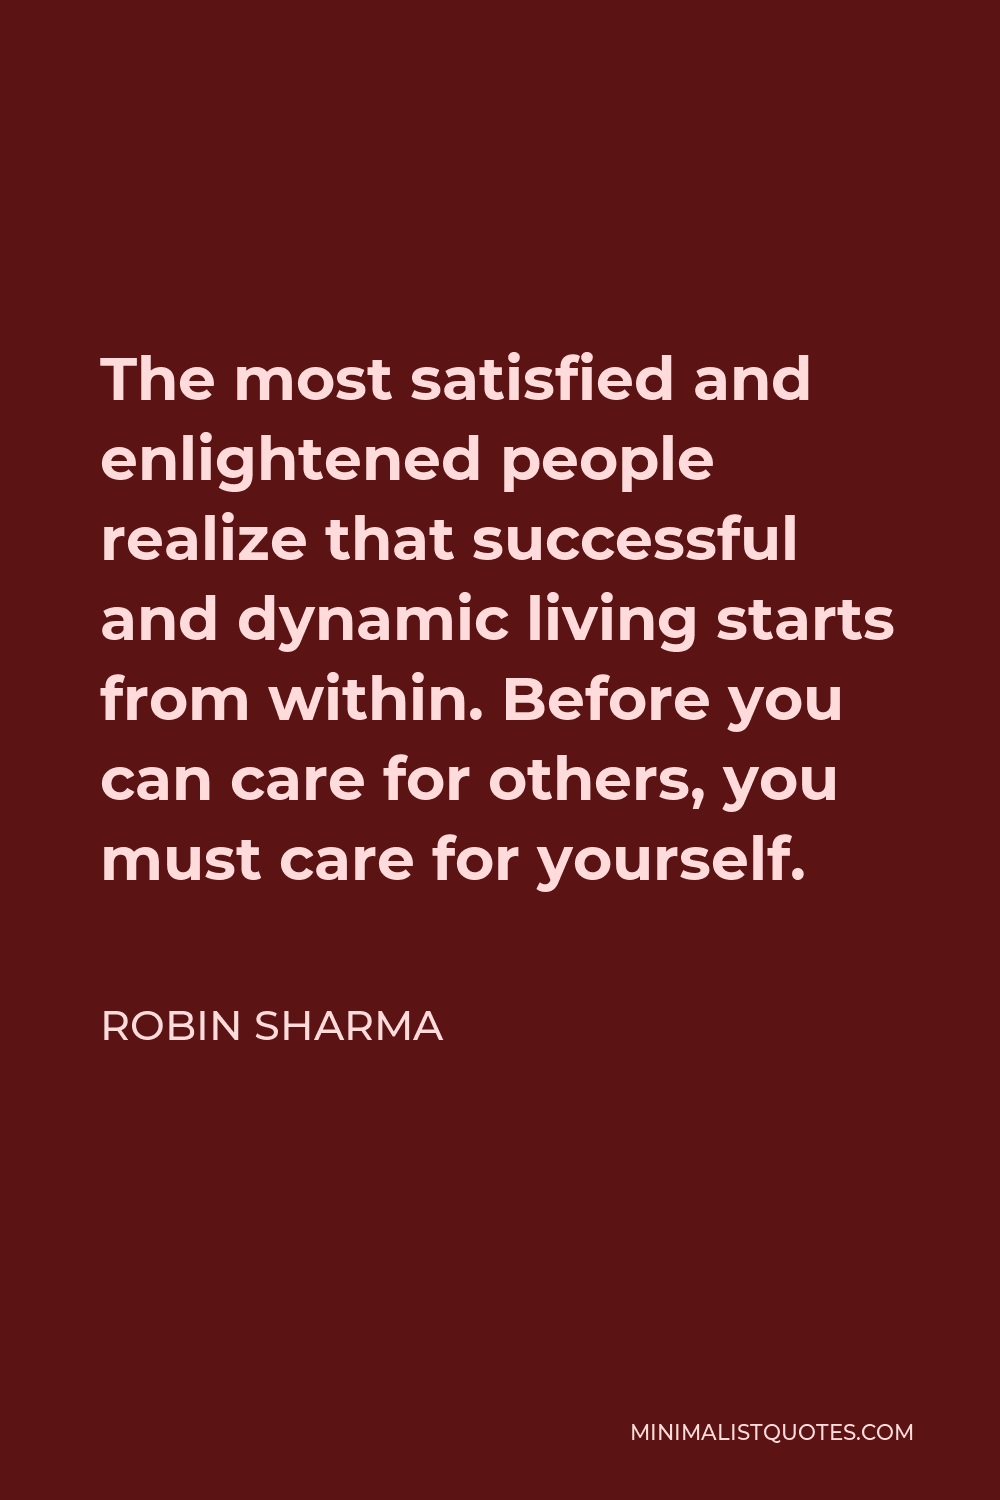 Robin Sharma Quote - The most satisfied and enlightened people realize that successful and dynamic living starts from within. Before you can care for others, you must care for yourself.